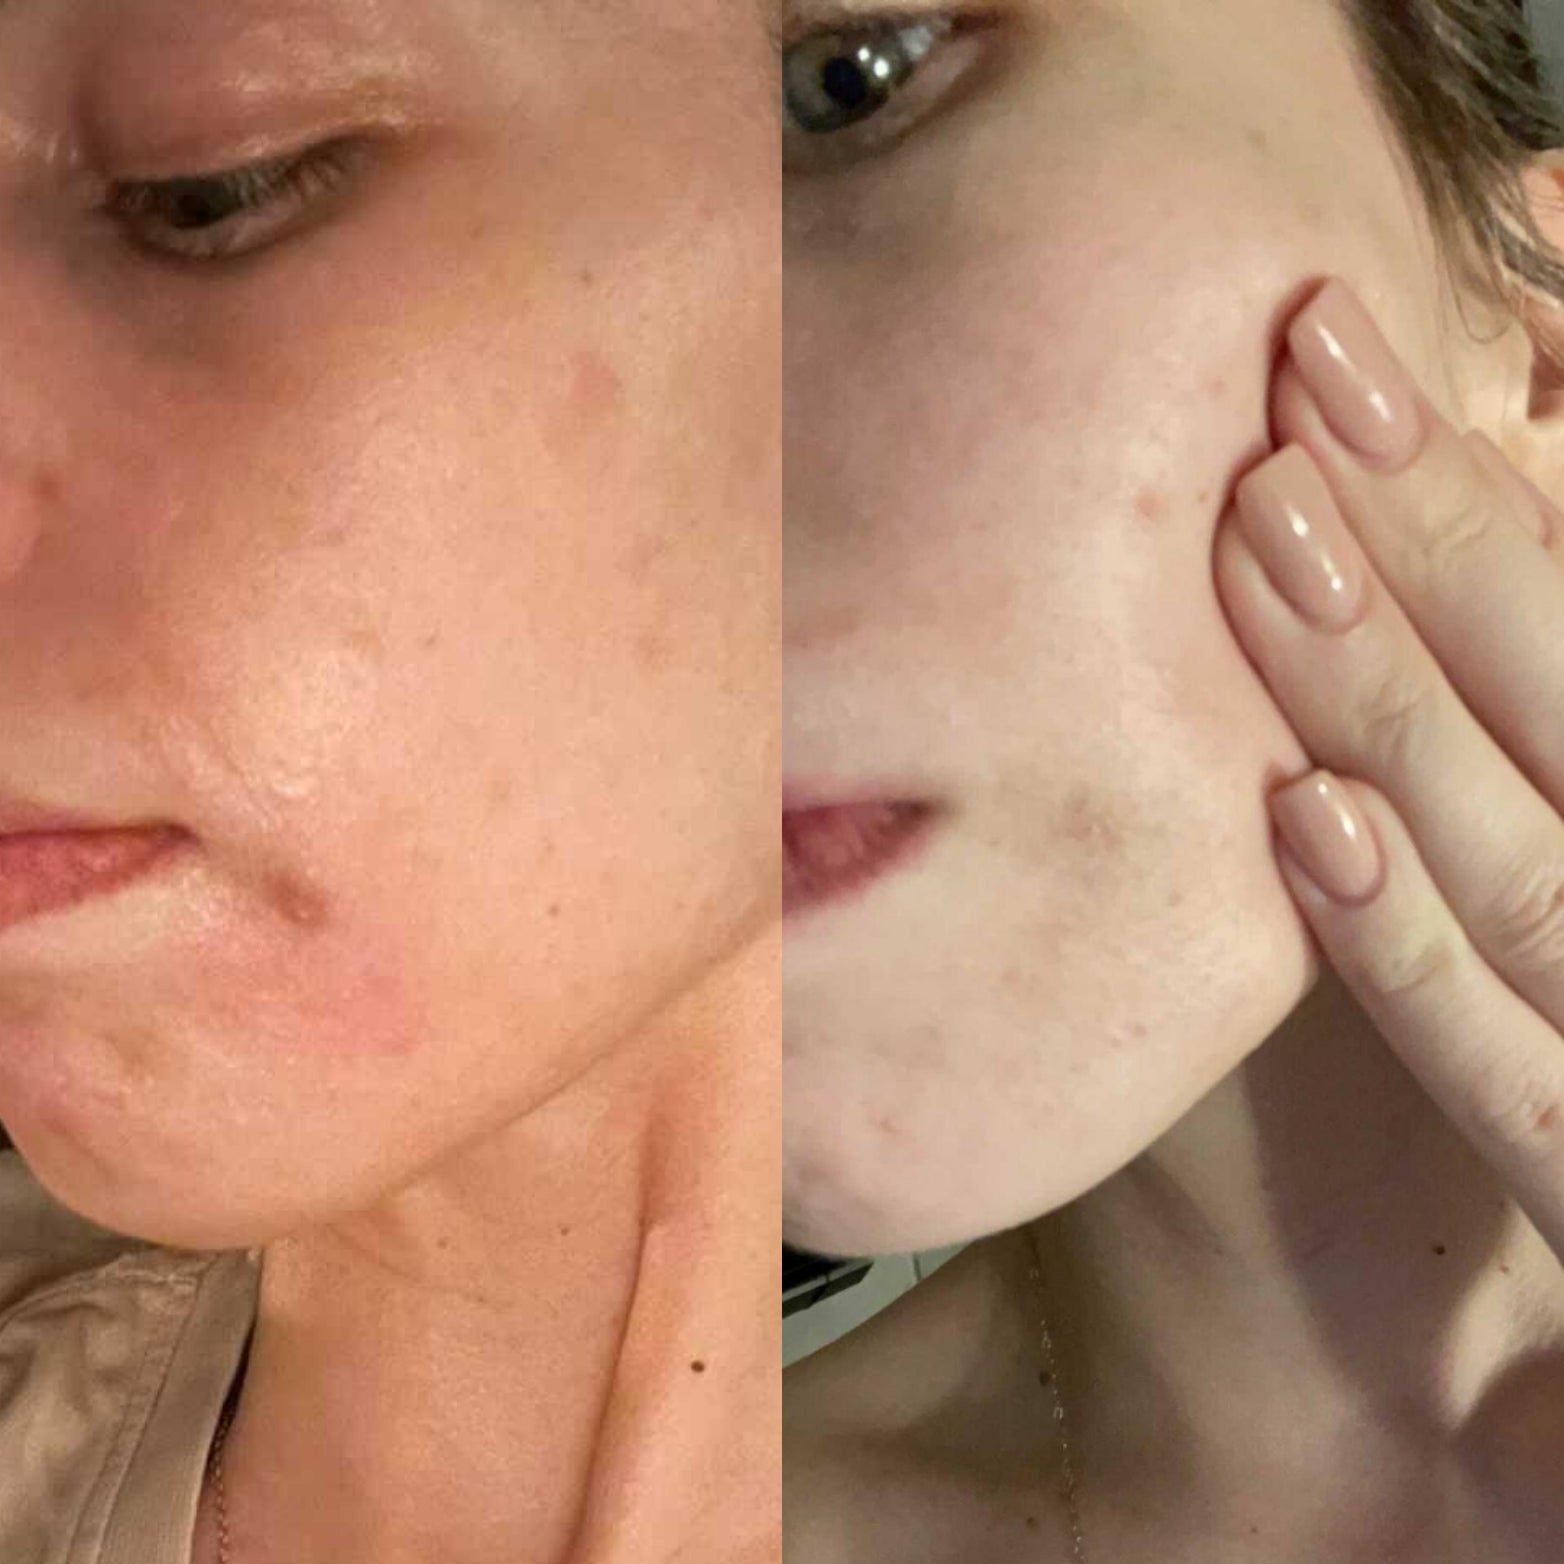 Before and After, results in one week. Brightening serum for sensitive skin, fights pigmentation, antibacterial, fights acne, stops breakouts. soothes, brightens and softens skin, Infused with natural ingredients. Skincare for sensitive skin. Anti-ageing, fine lines, Natural, vegan and cruelty-free skincare. Breastfeeding friendly, pregnancy safe. serum for sensitive skin, water based serum. All natural